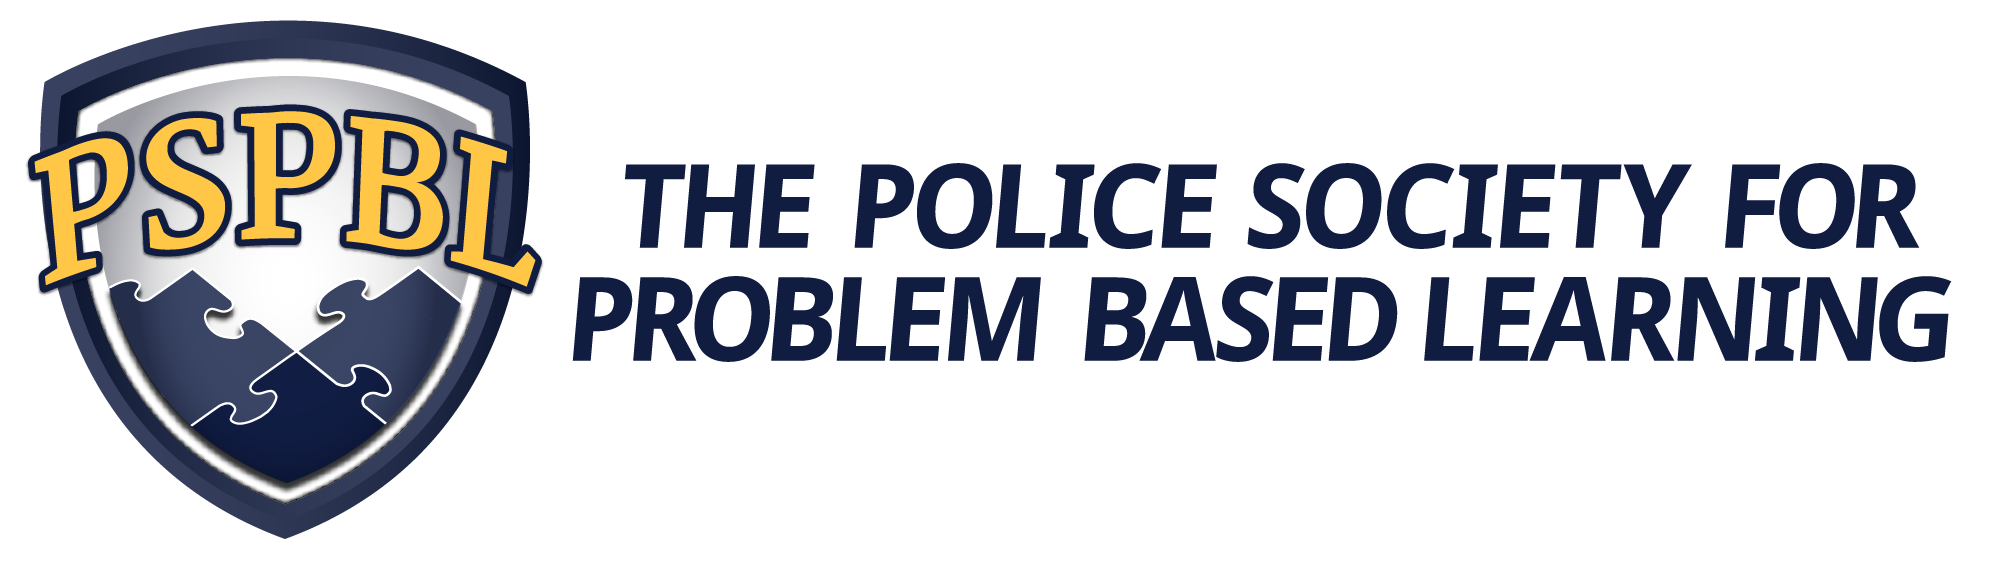 The Police Society for Problem Based Learning